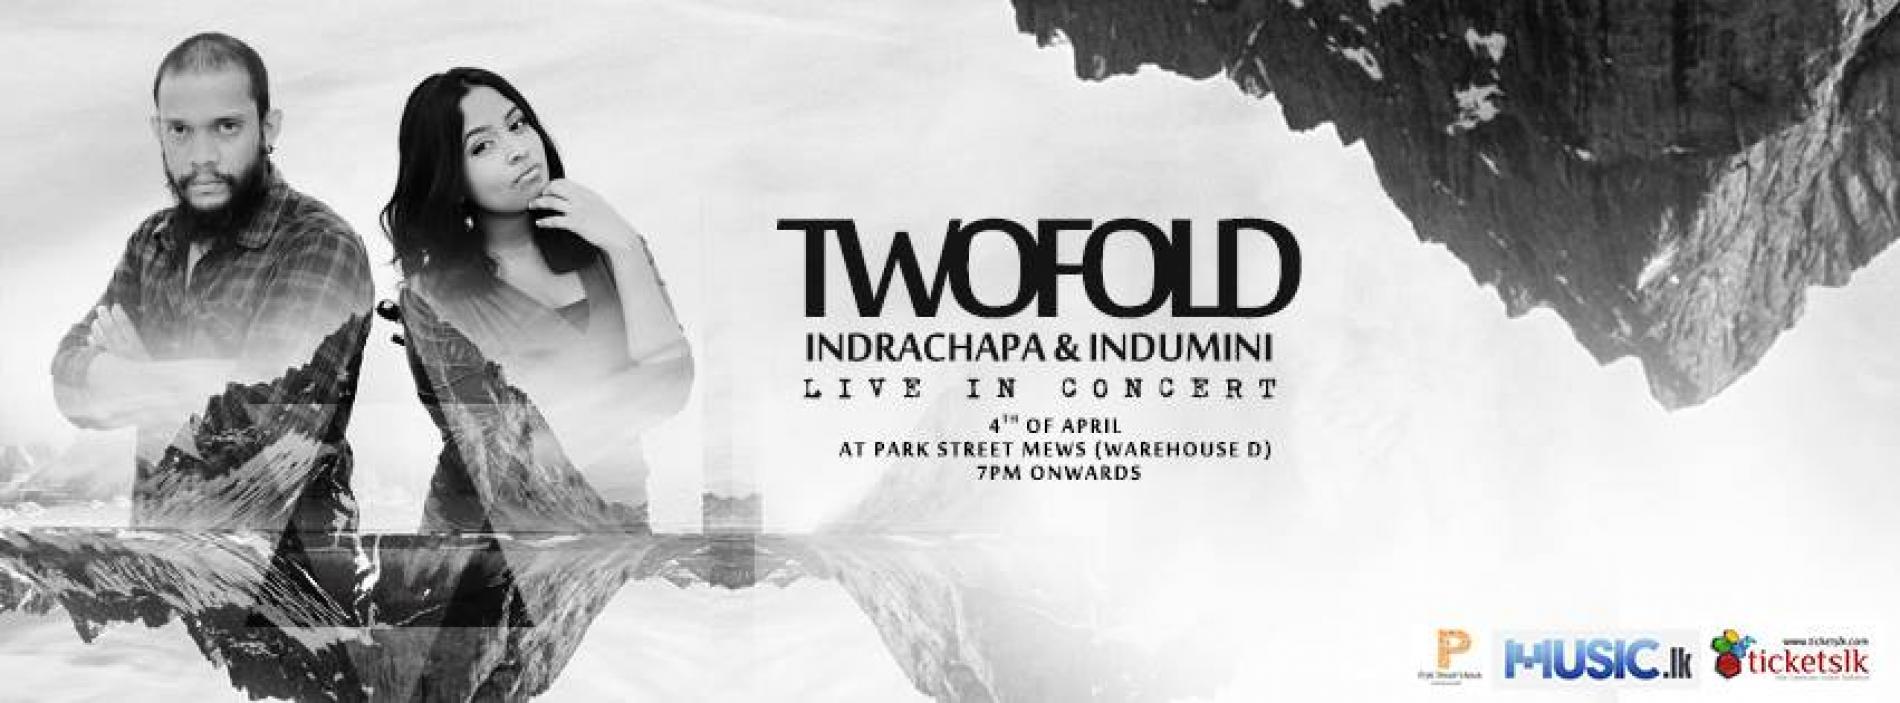 ” TWOFOLD ” Indrachapa & Indumini Live In Concert